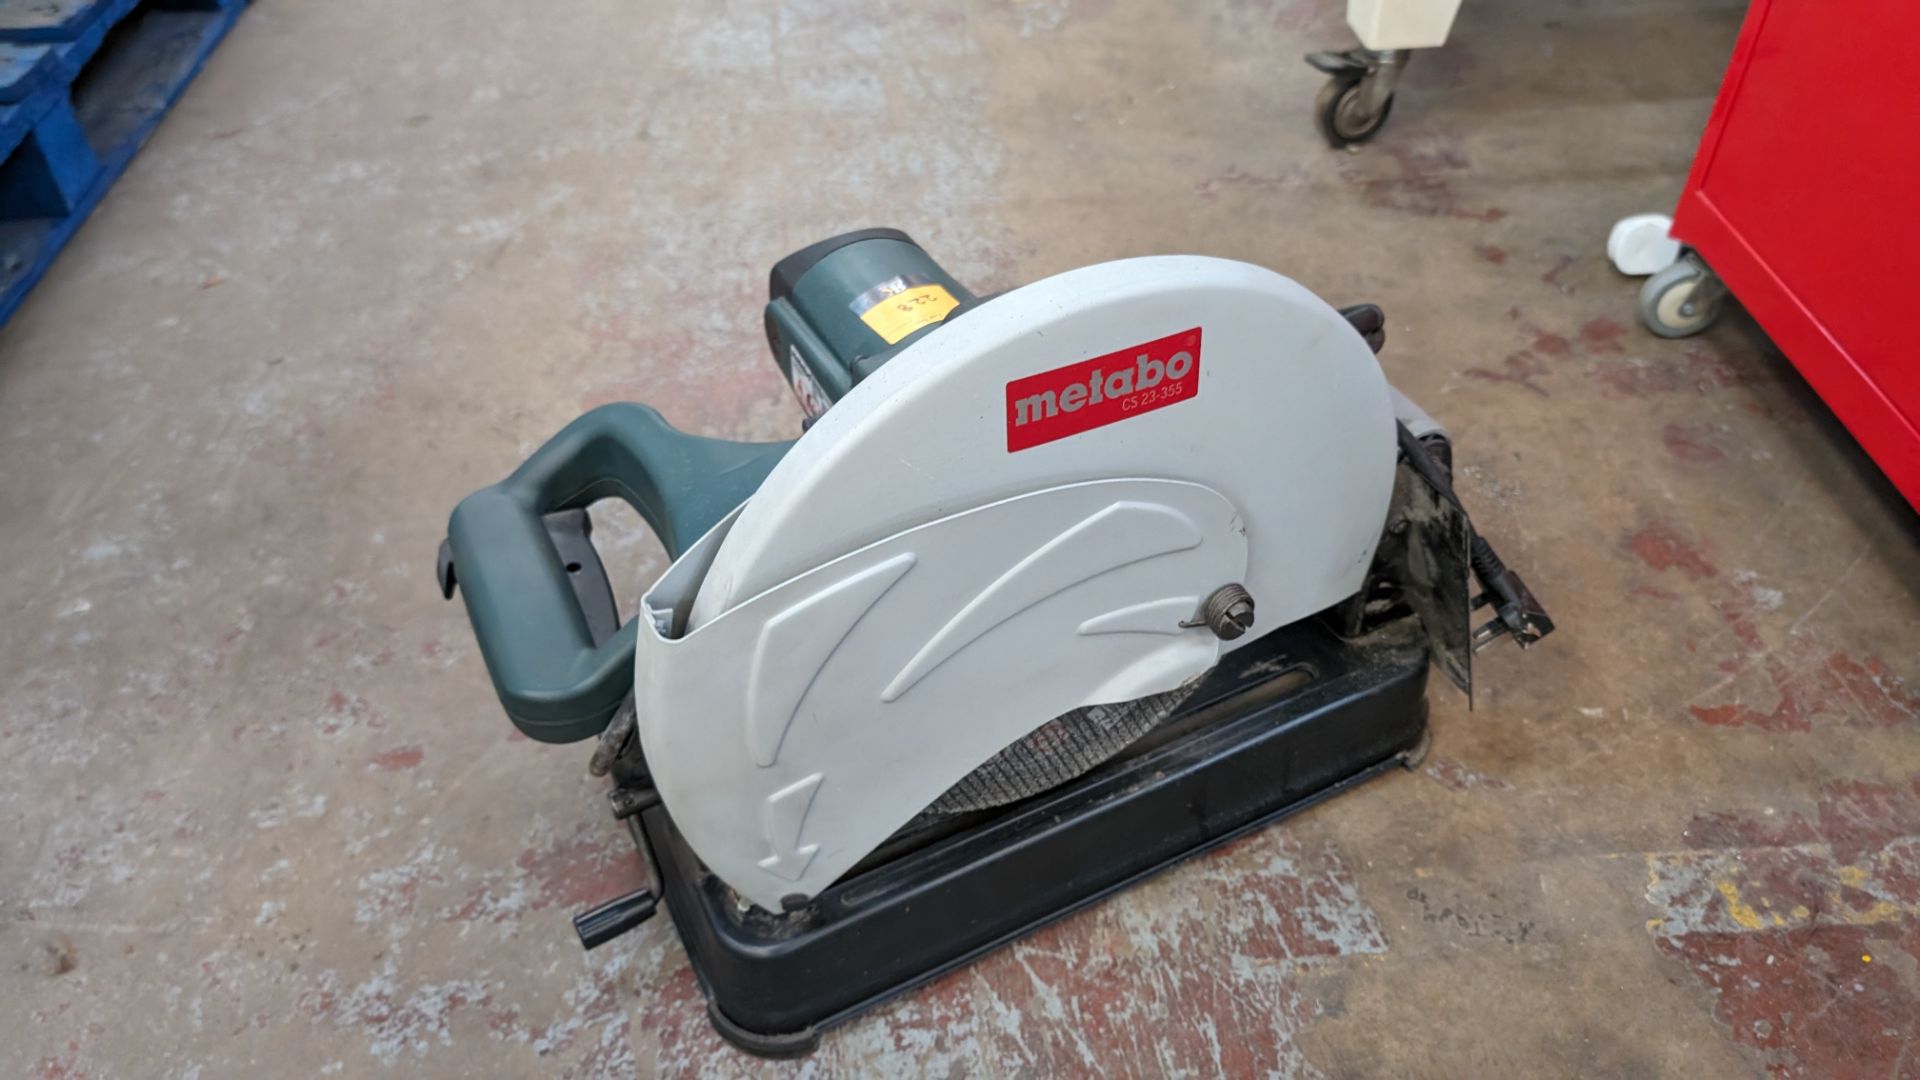 Metabo pull down/chop saw - Image 6 of 6